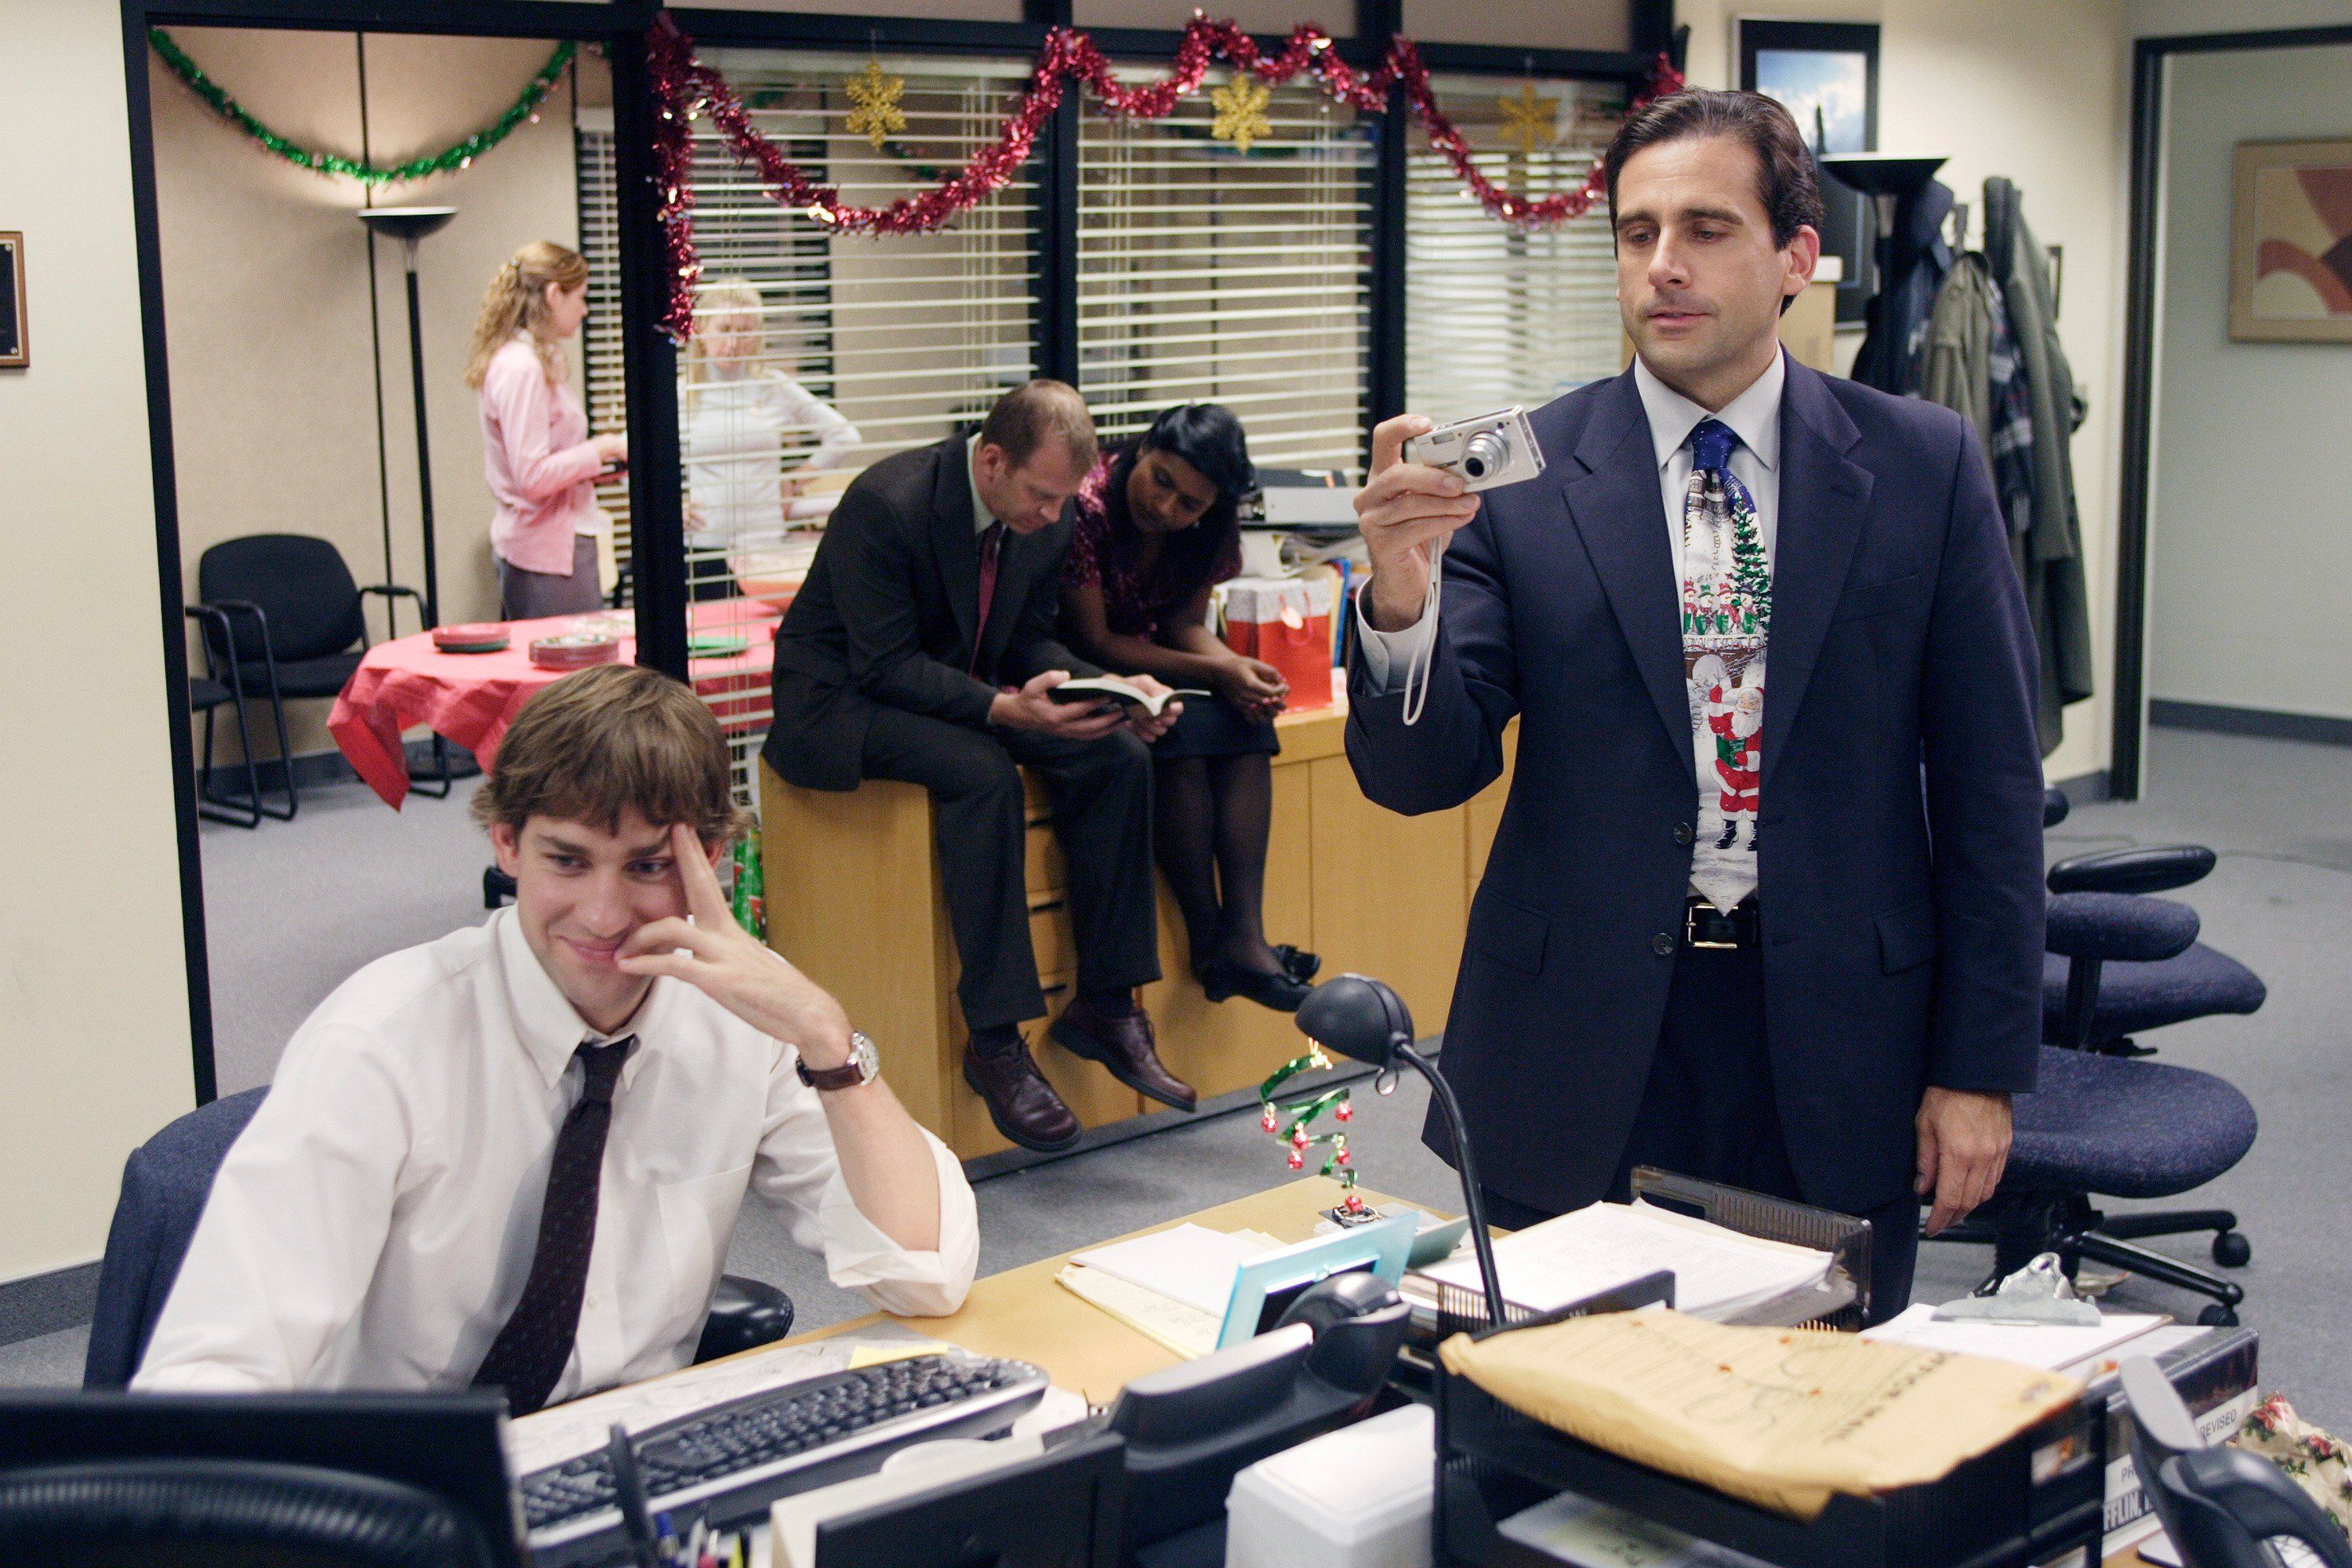 100 Best Quotes From 'The Office' - Most Iconic 'Office' Quotes